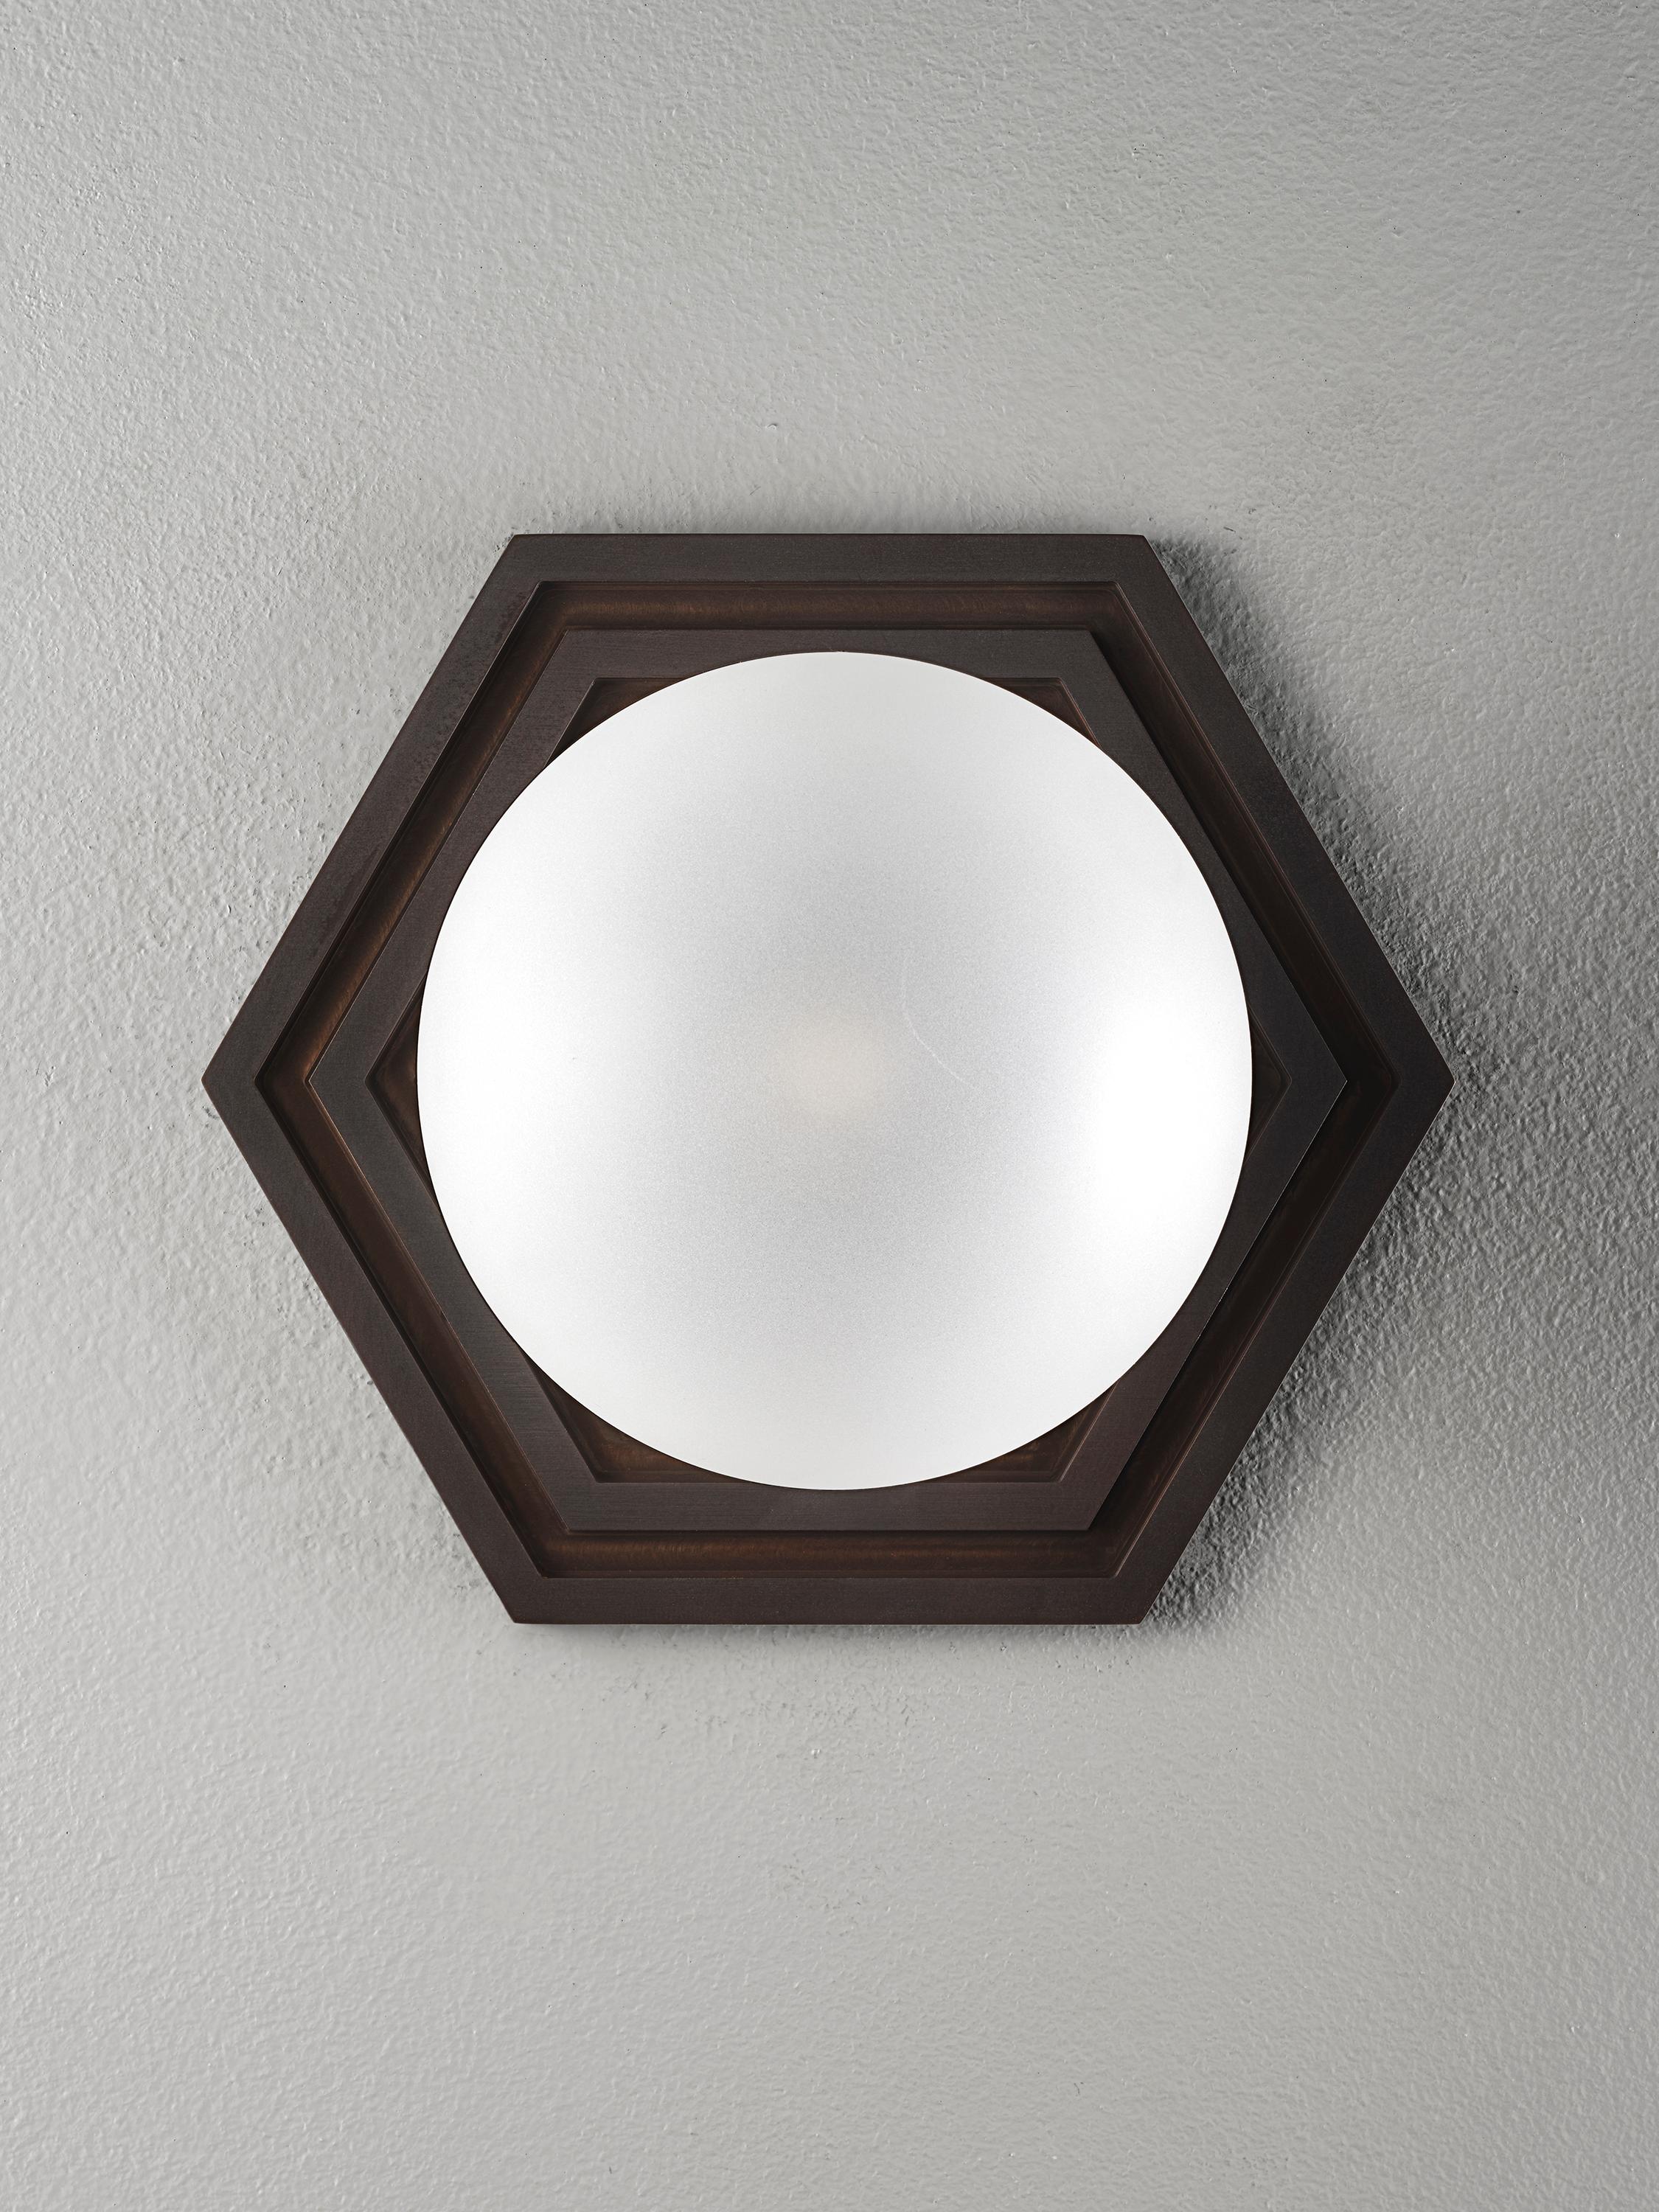 Mira Hex Wall Sconce in Oil-Rubbed Bronze and Blown Glass by Blueprint Lighting In New Condition For Sale In New York, NY